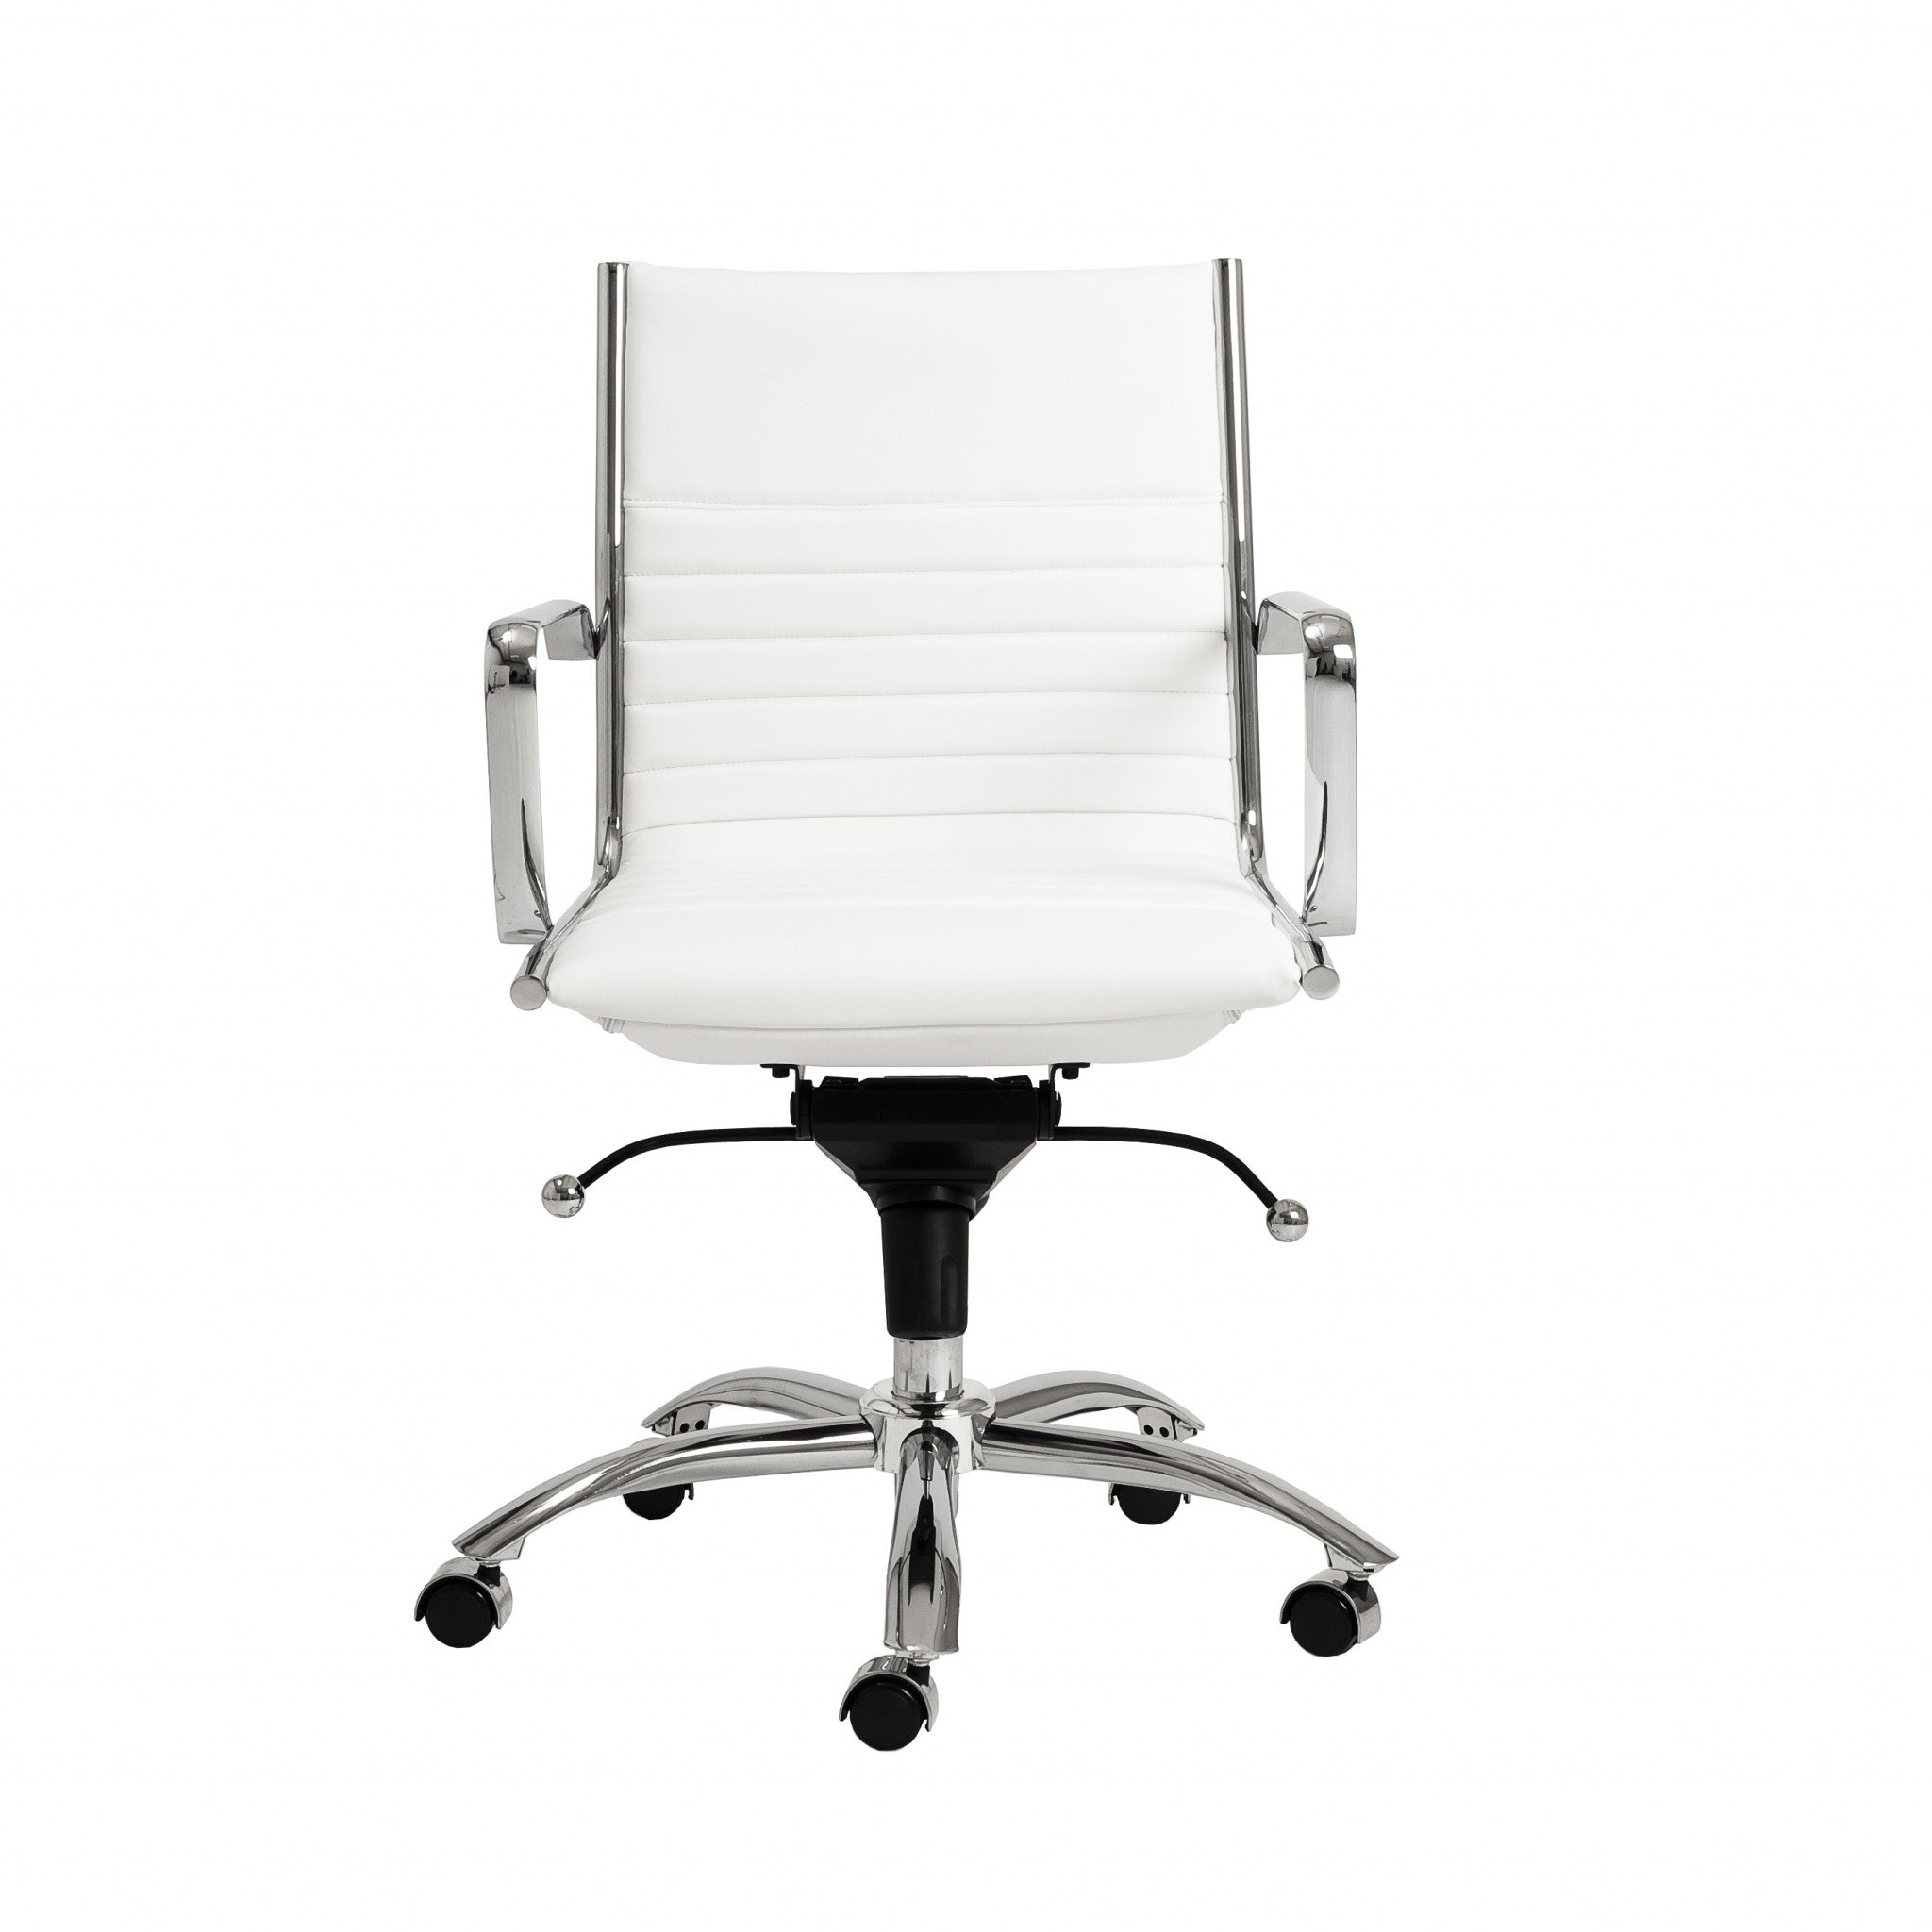 White-Faux-Leather-Seat-Swivel-Adjustable-Task-Chair-Leather-Back-Steel-Frame-Office-Chairs